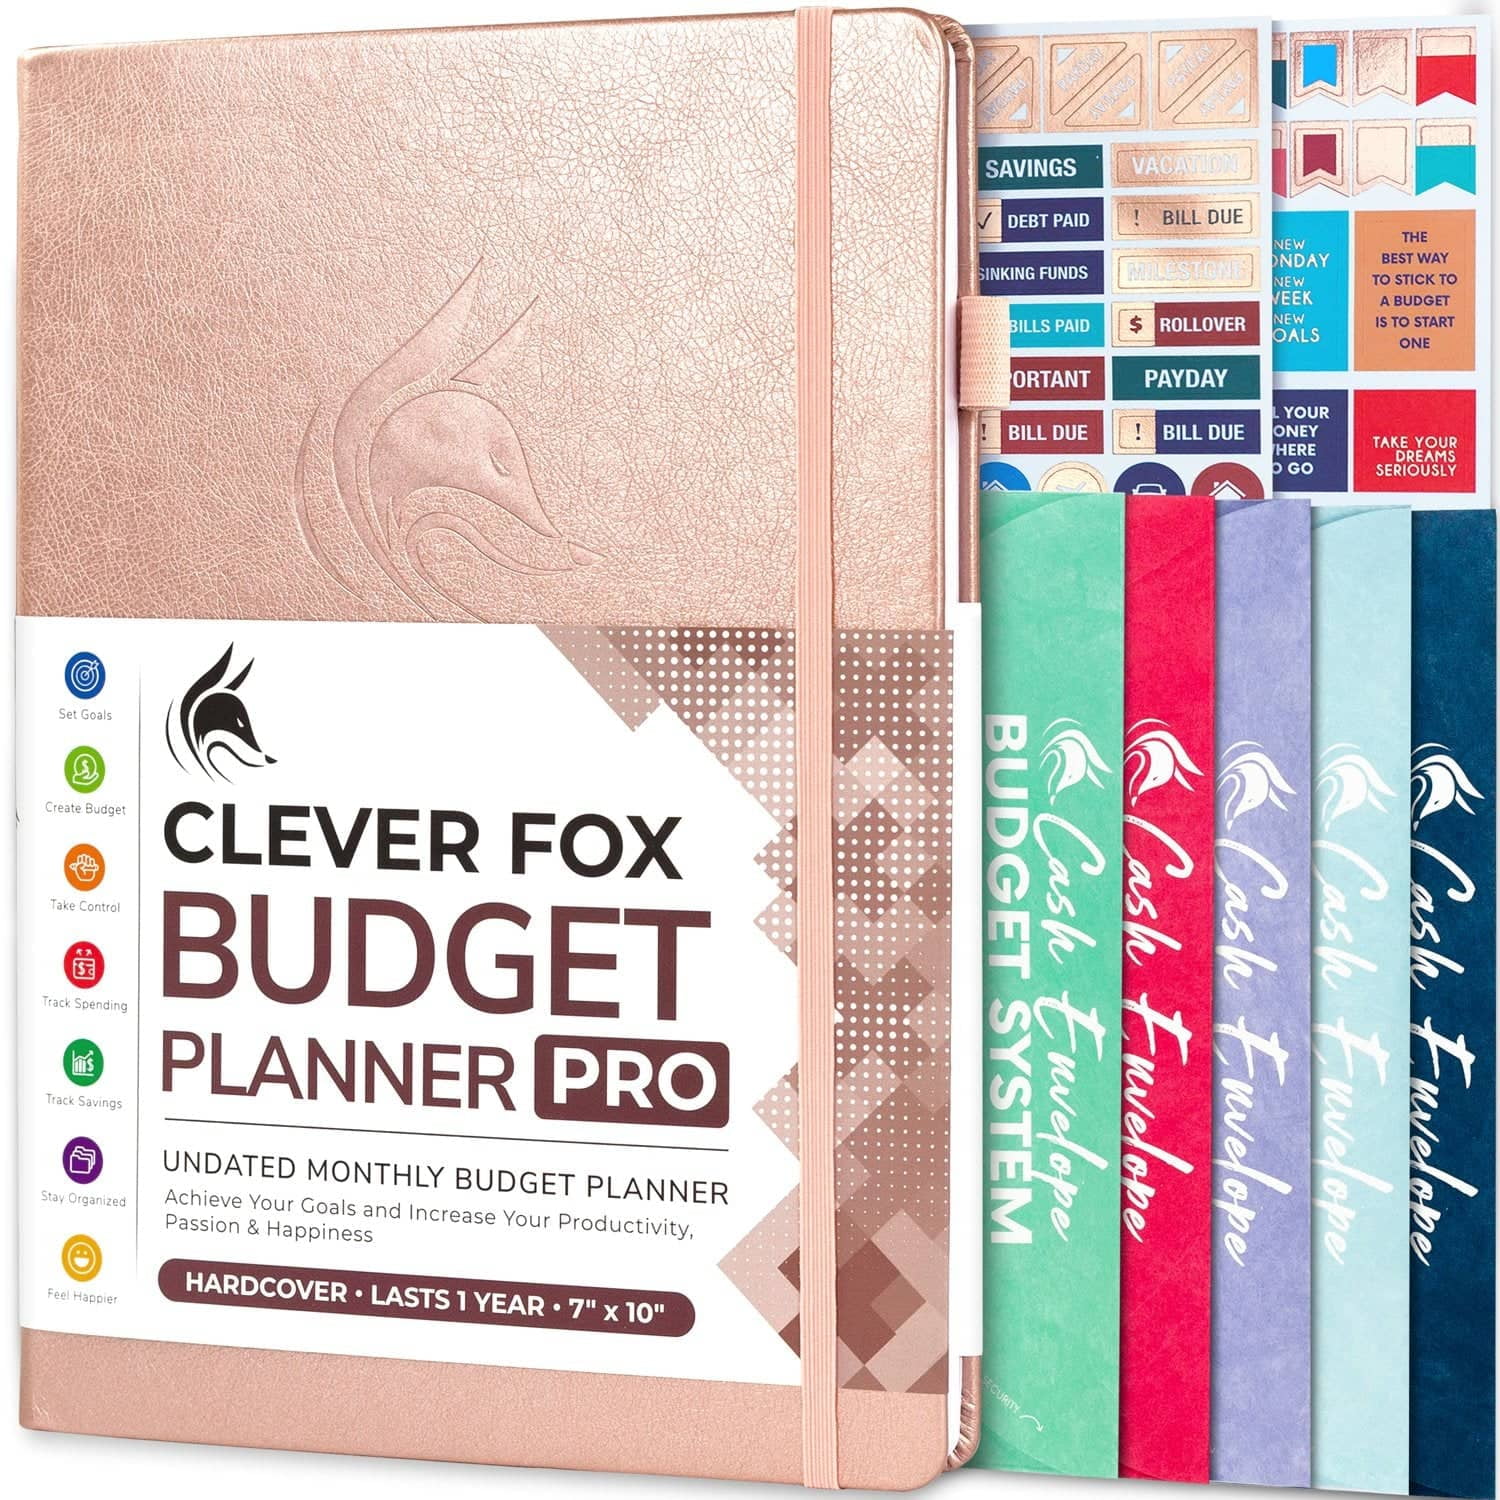 Clever Fox Budget Planner Review (Pros, Cons and Video Walkthrough